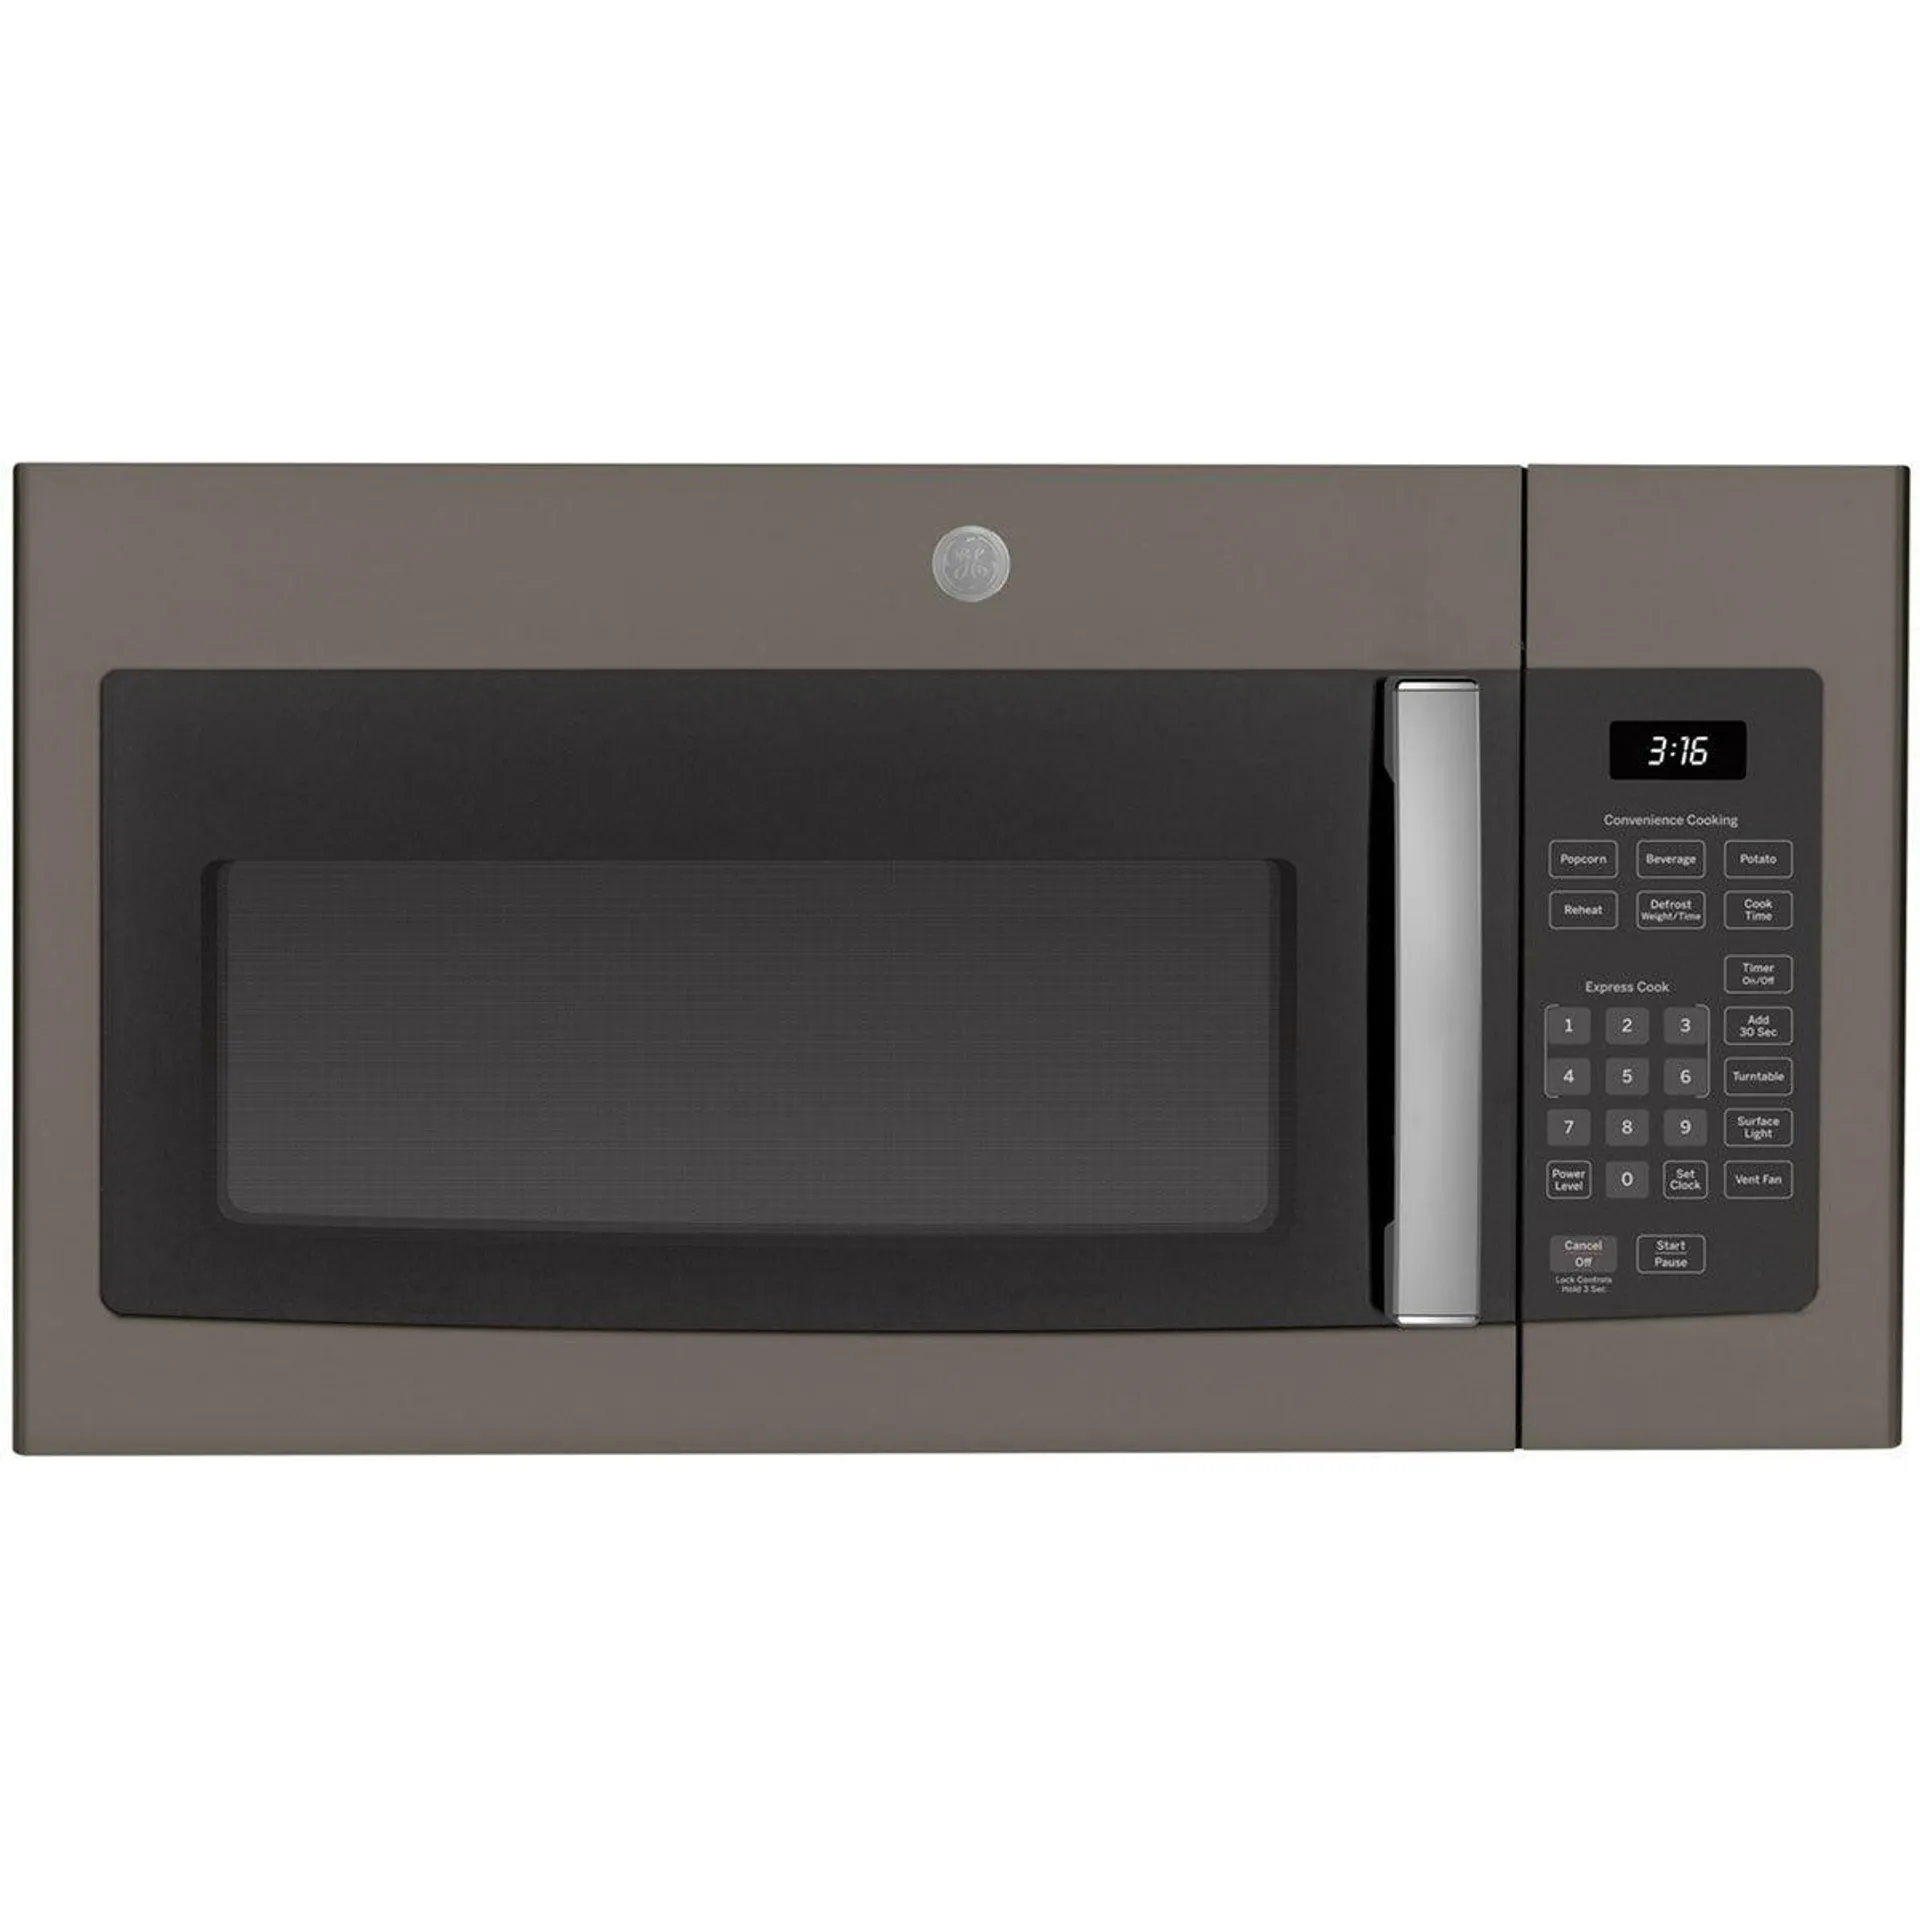 GE 1.6 Cu. Ft. Over-the-Range Microwave Oven, Slate